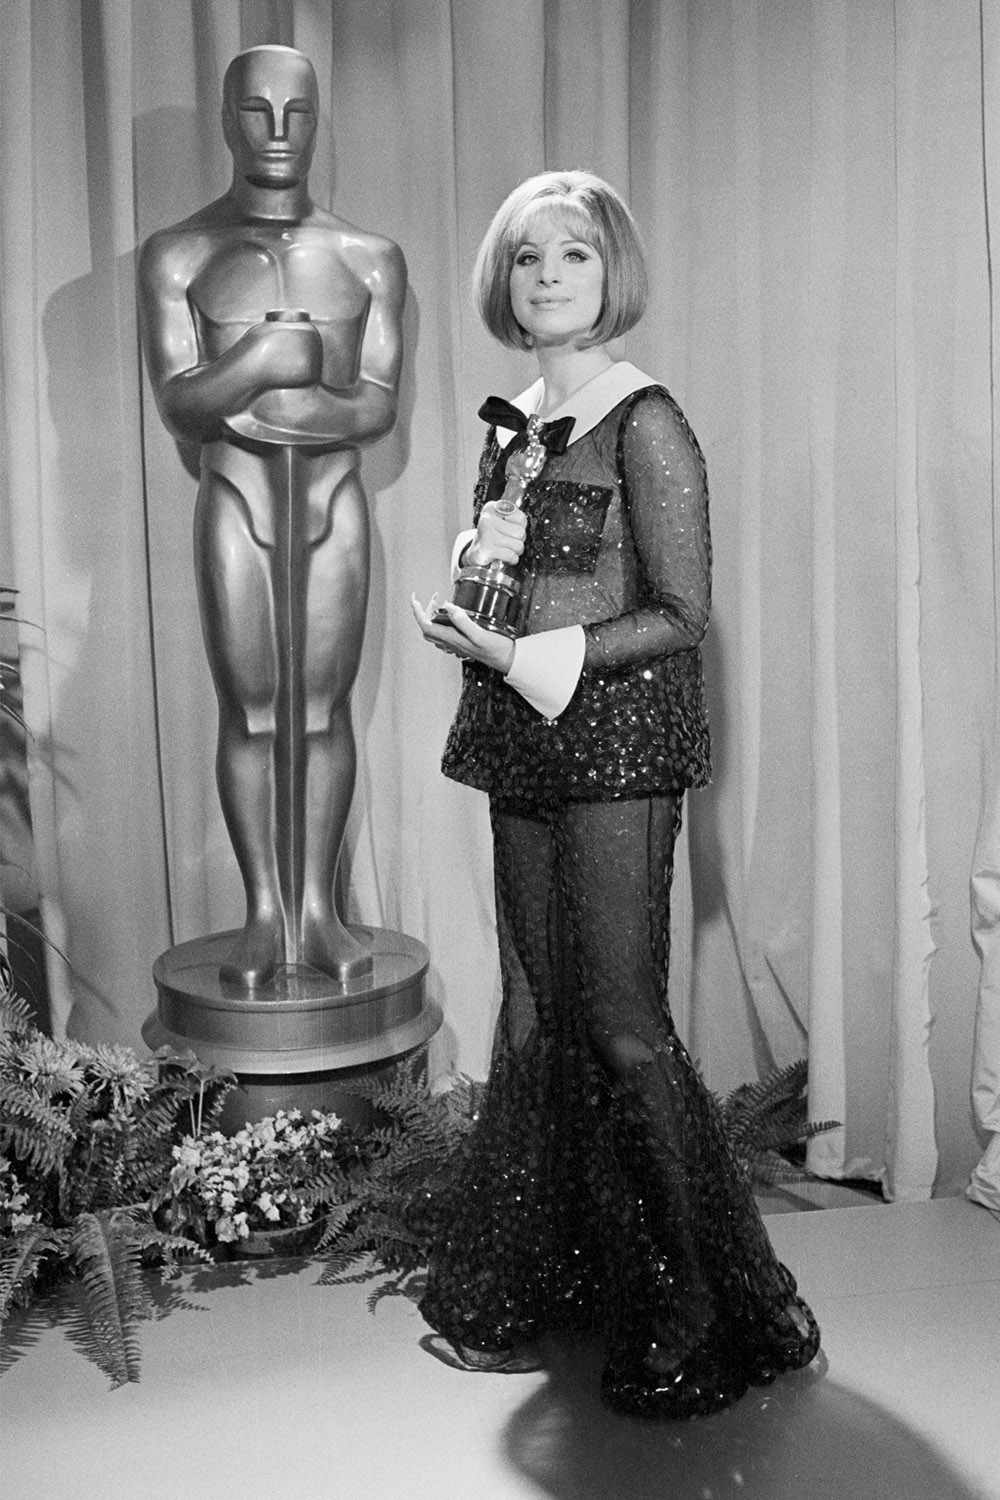 Barbra Streisand with the Oscar she won for Best Actress in Funny Girl.